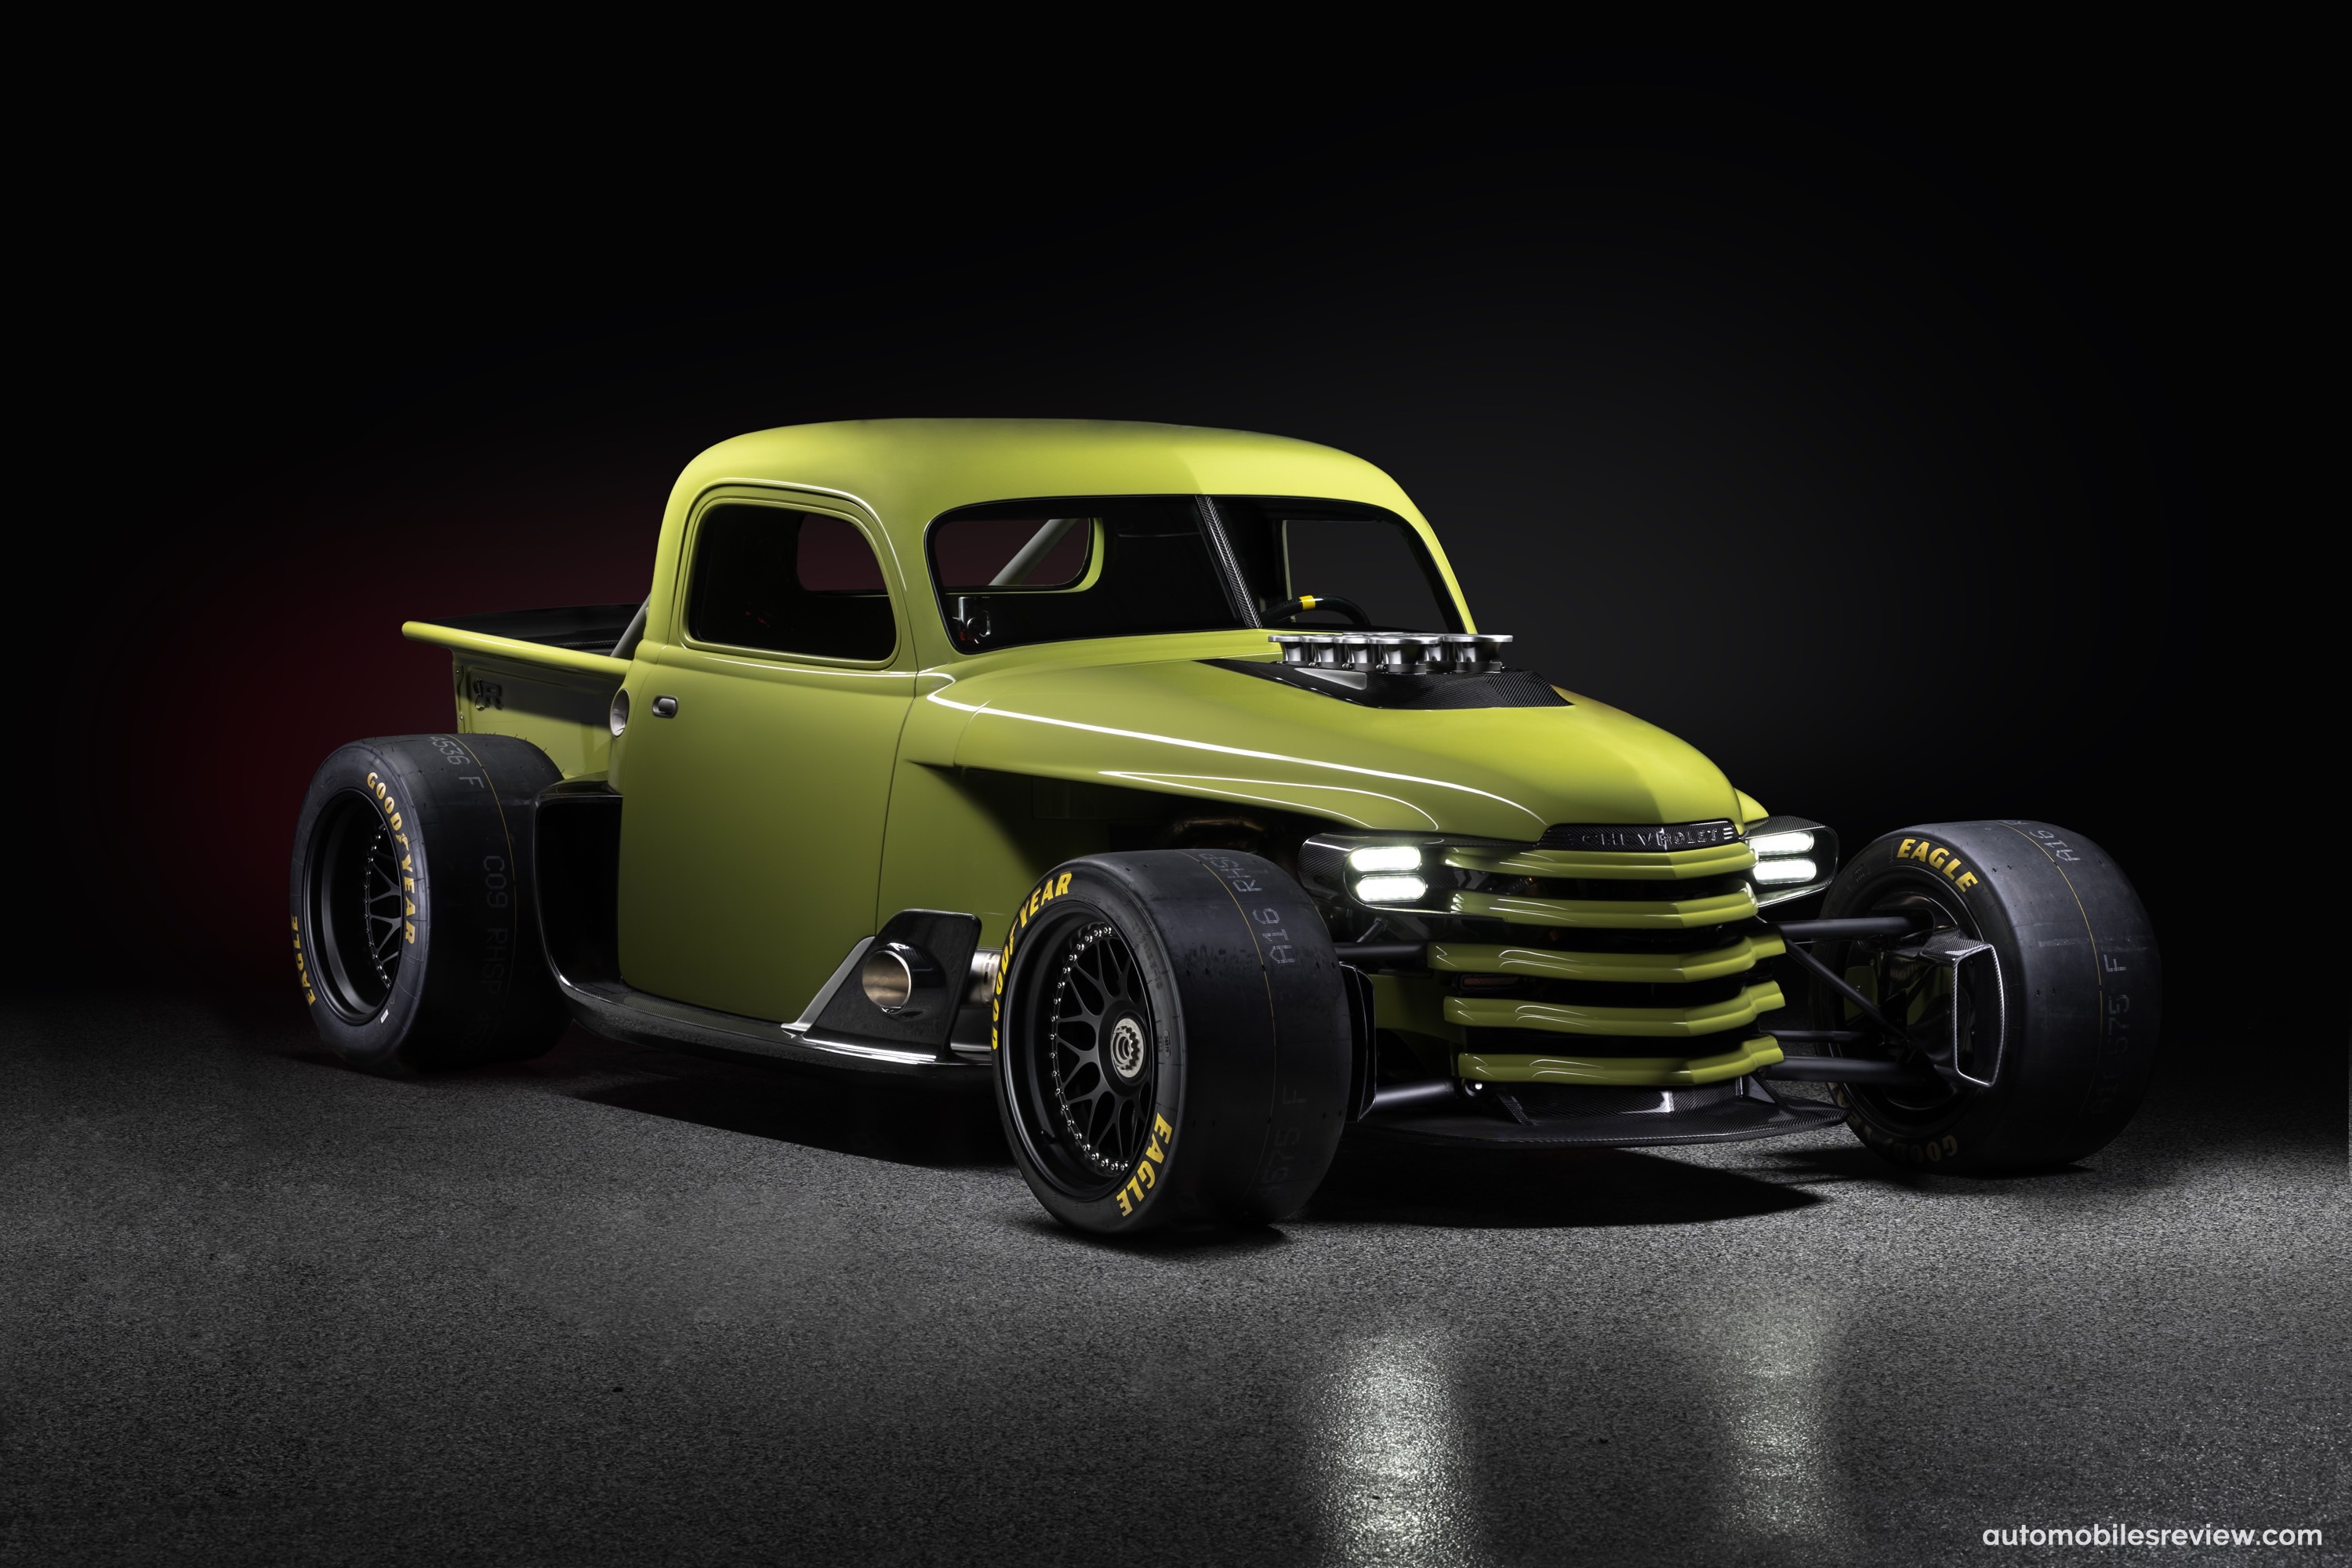 Ringbrothers Chevrolet Super Truck ENYO